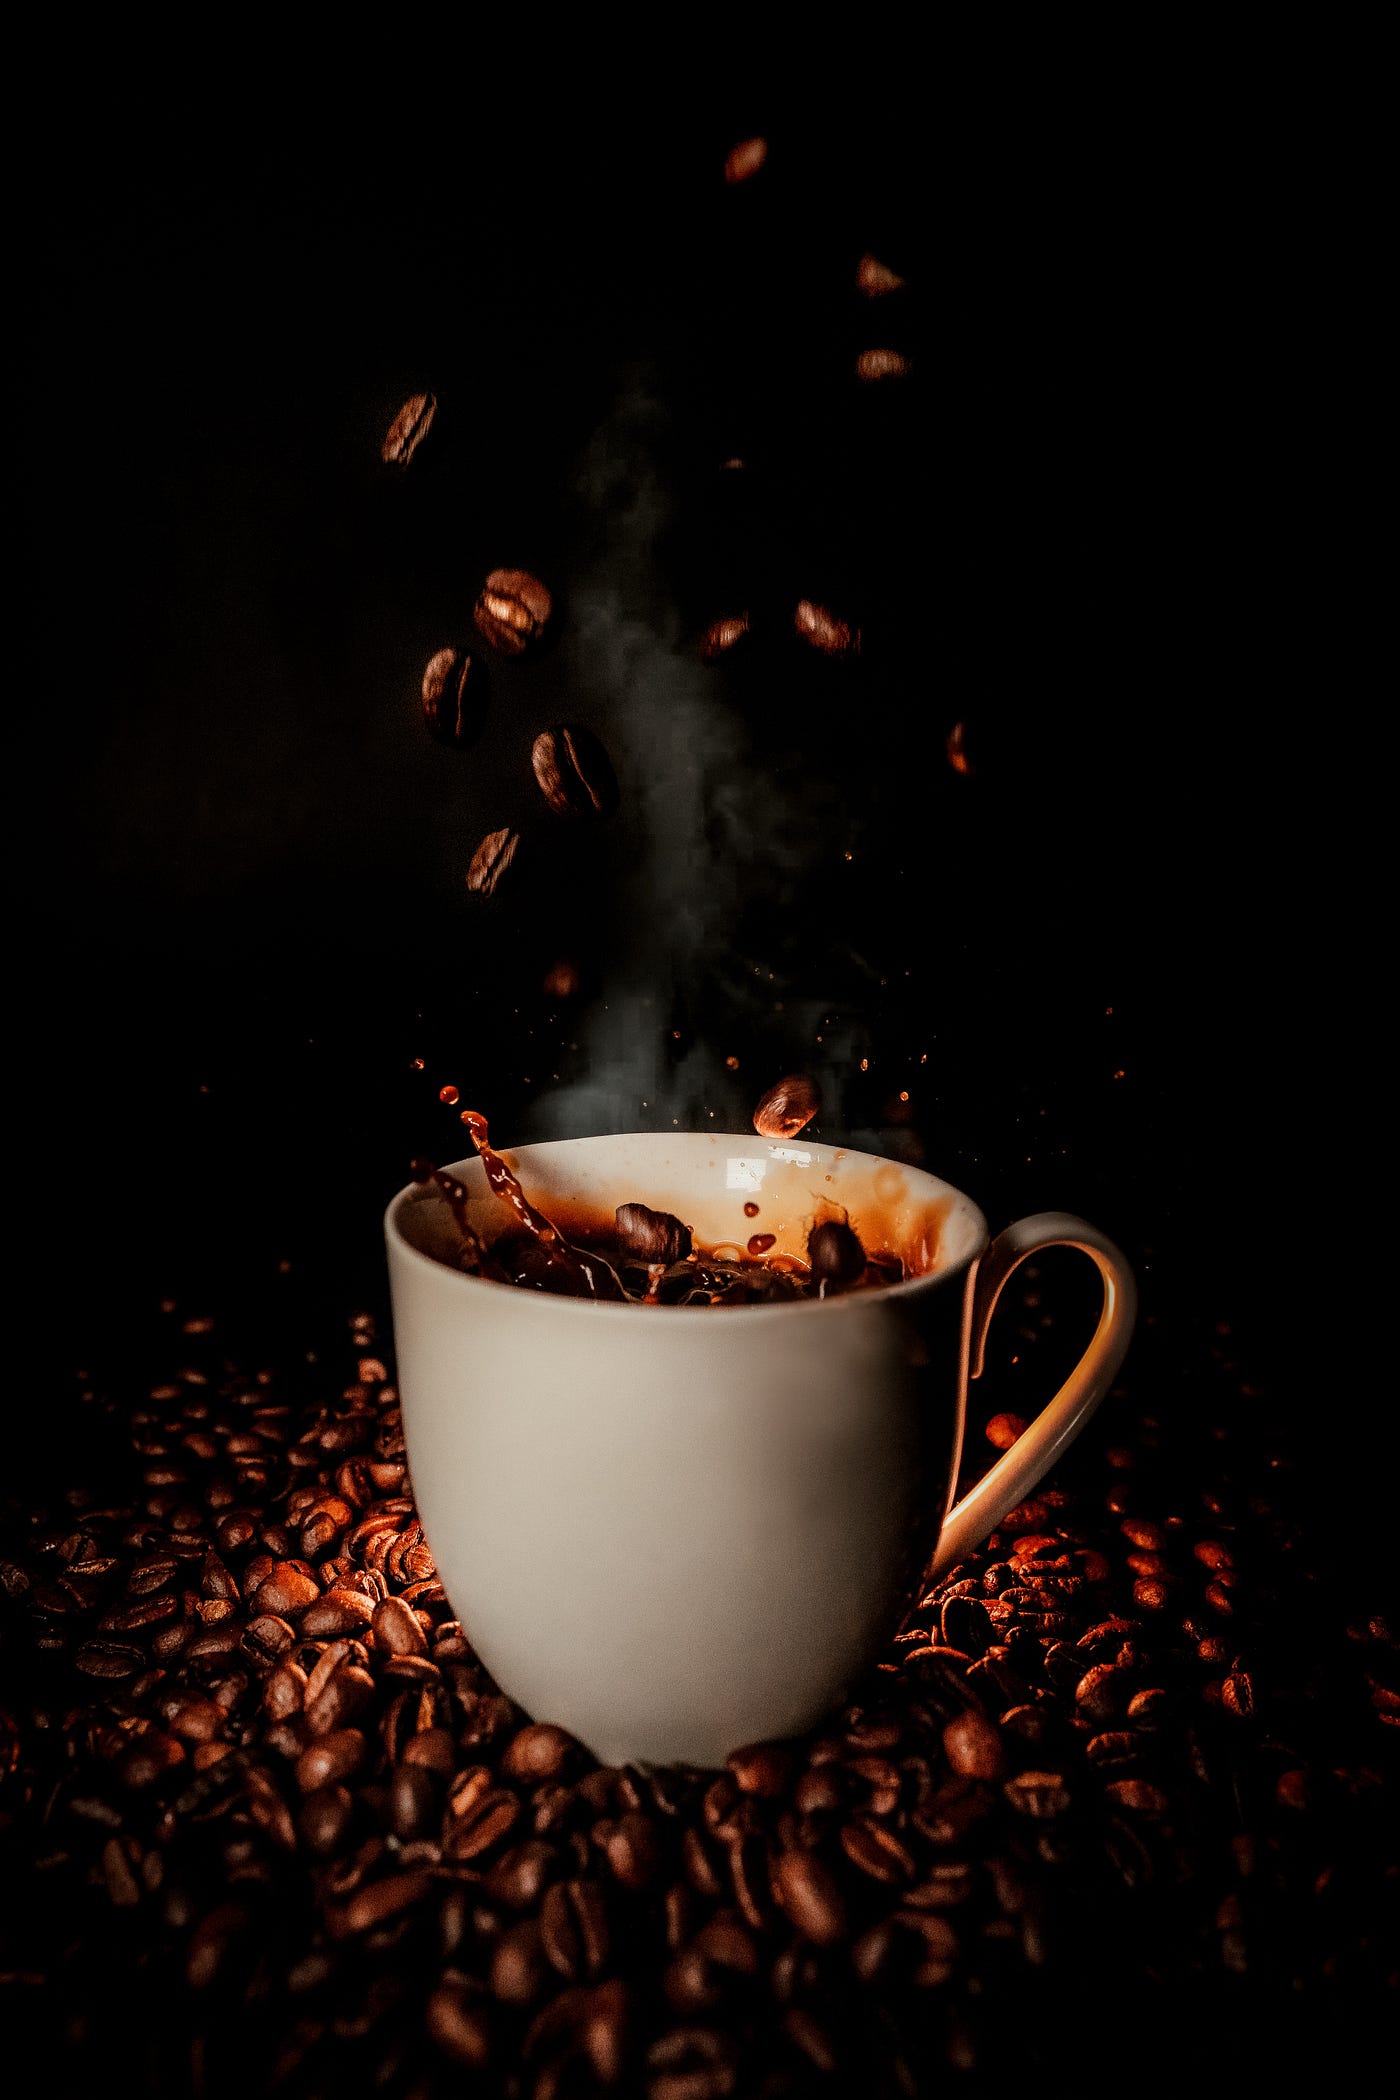 Several coffee beans drop from above into a cup of coffee. Black background. The brain’s default mode network is active when we are not focused on the outside world and our brains are in a wakeful rest. Examples include daydreaming and mind-wandering.